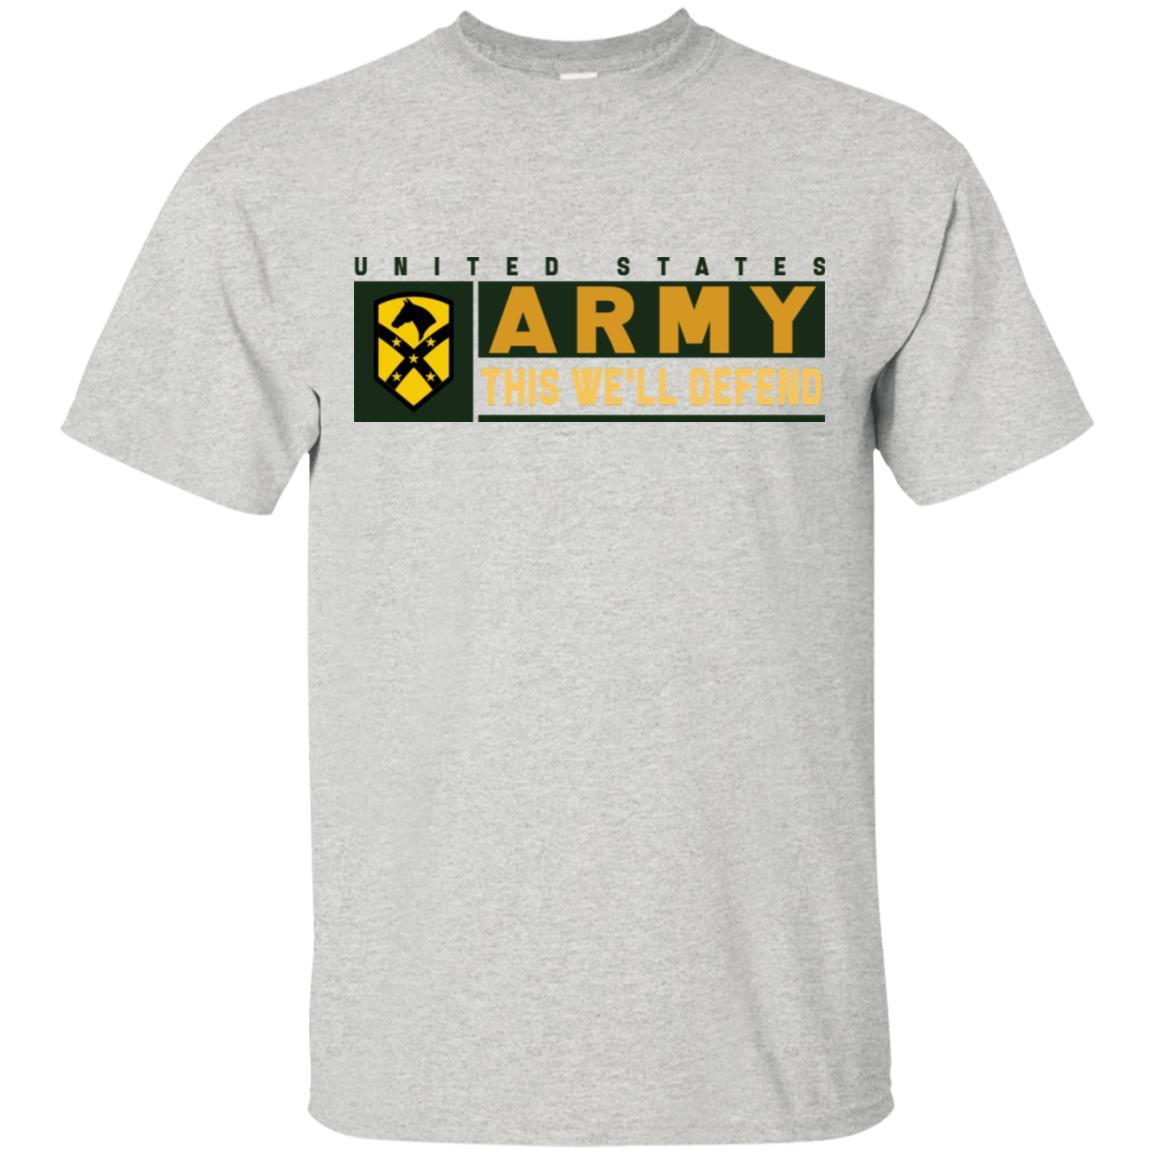 US Army 15TH SUSTAINMENT BRIGADE- This We'll Defend T-Shirt On Front For Men-TShirt-Army-Veterans Nation